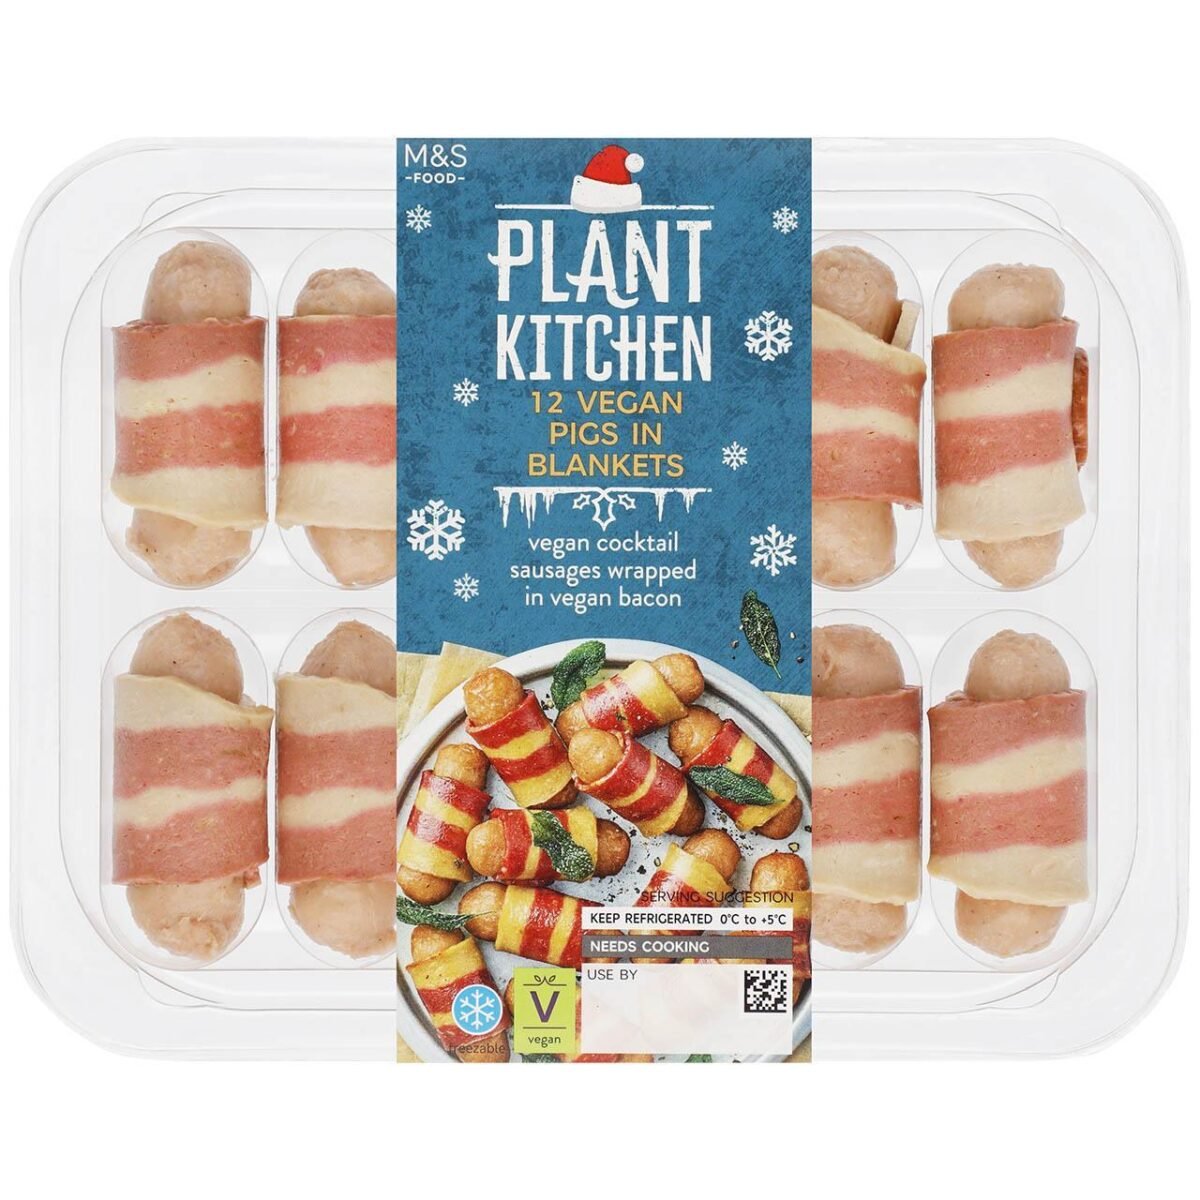 Image of pack of M&S vegan pigs in blankets from Christmas range 2023